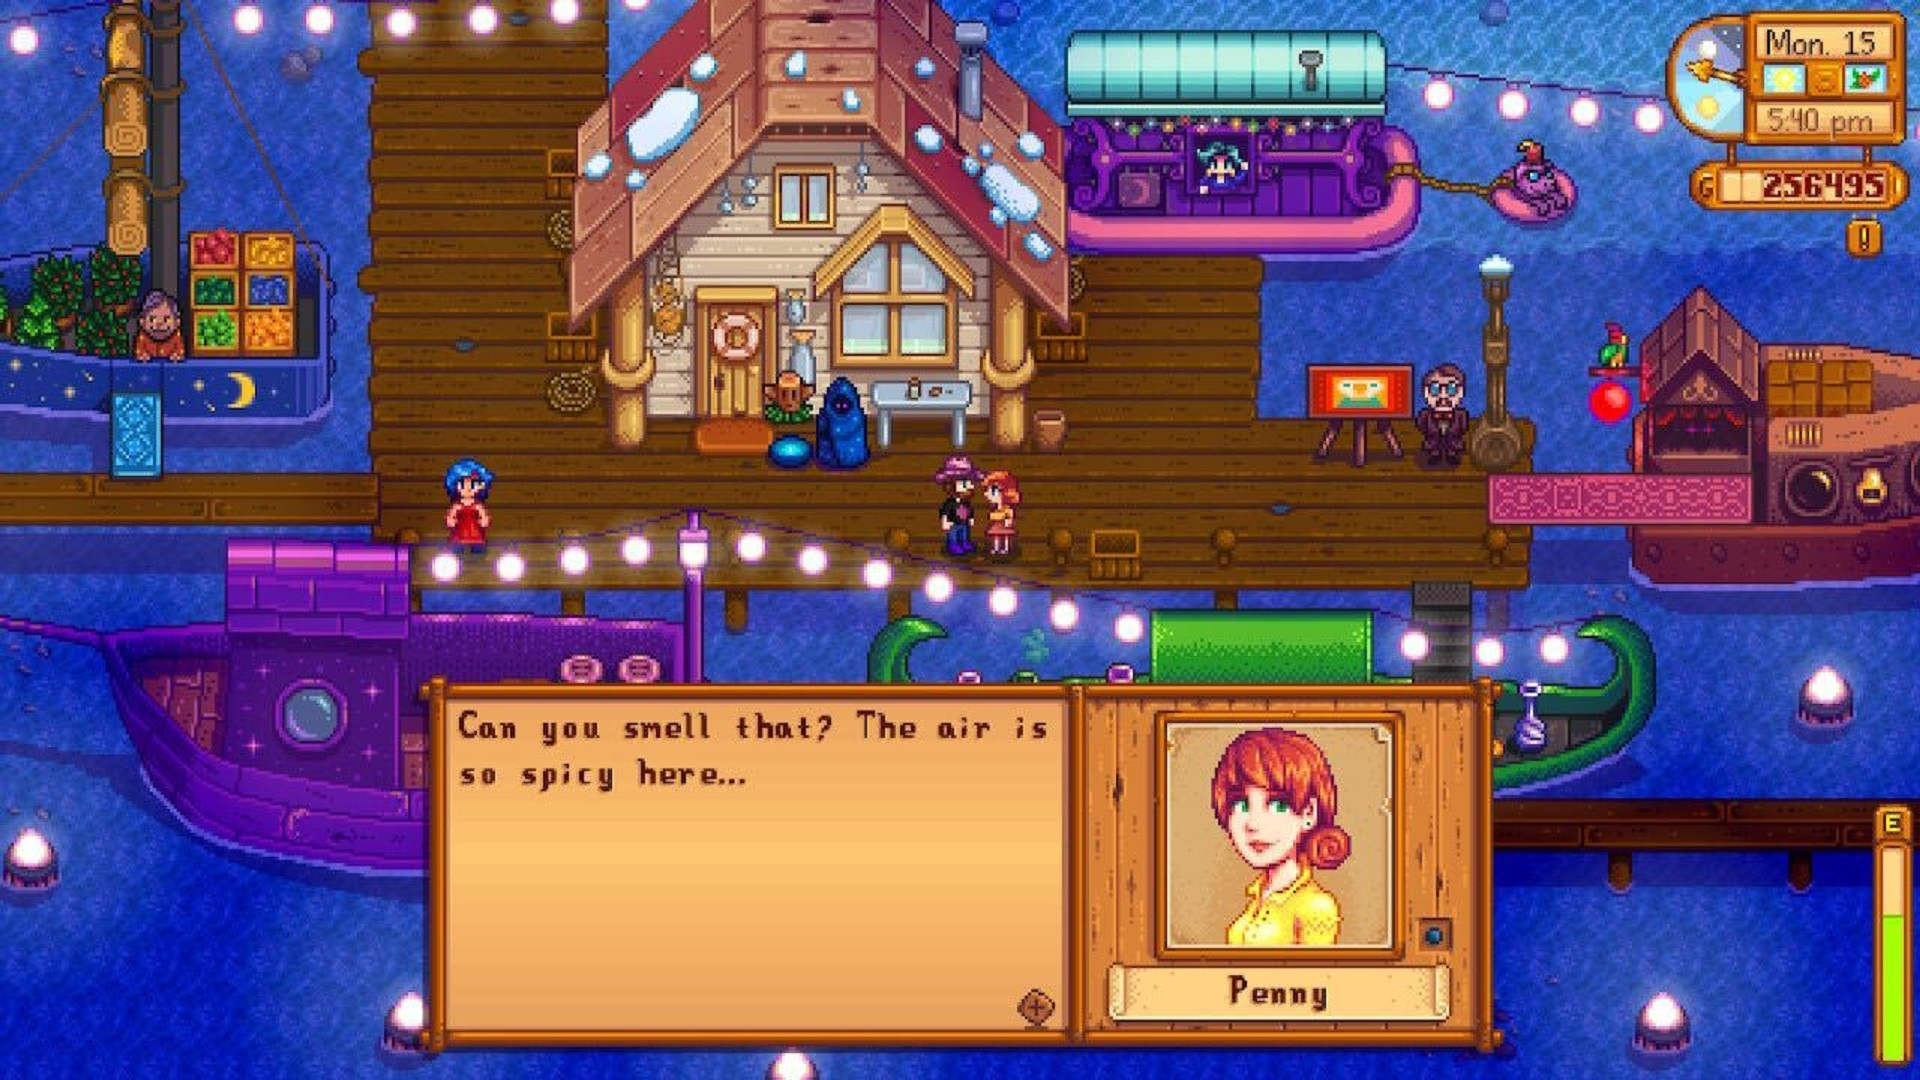 Stardew Valley's Penny asking about the air